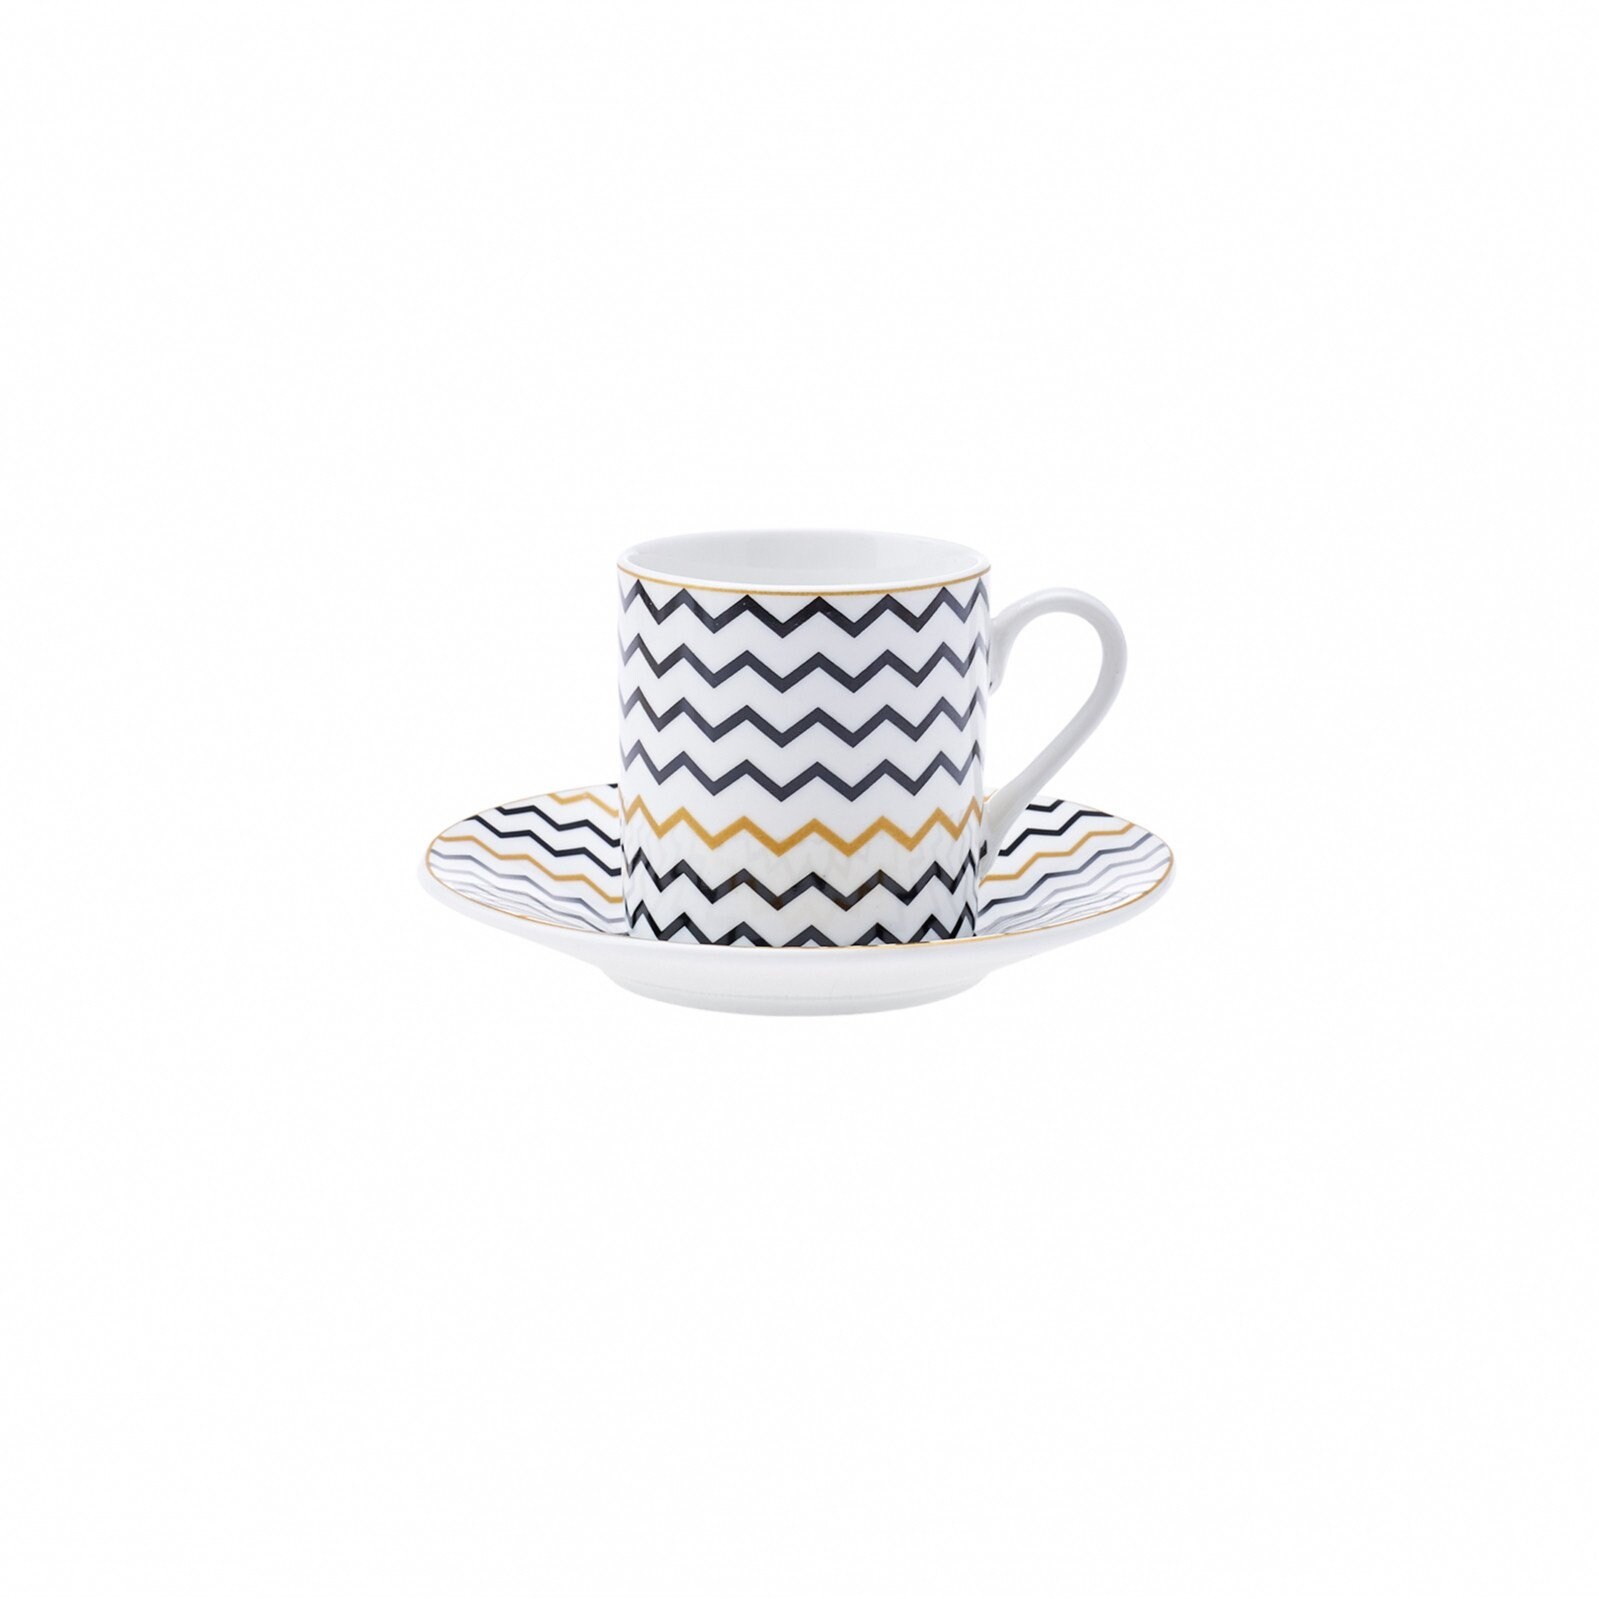 https://ak1.ostkcdn.com/images/products/is/images/direct/6dc4abfc3dbf6a46b952f8439897fc90e3350649/Karaca-Nautica-Turkish-Coffee-Cup-and-Saucer-Set-for-6.jpg